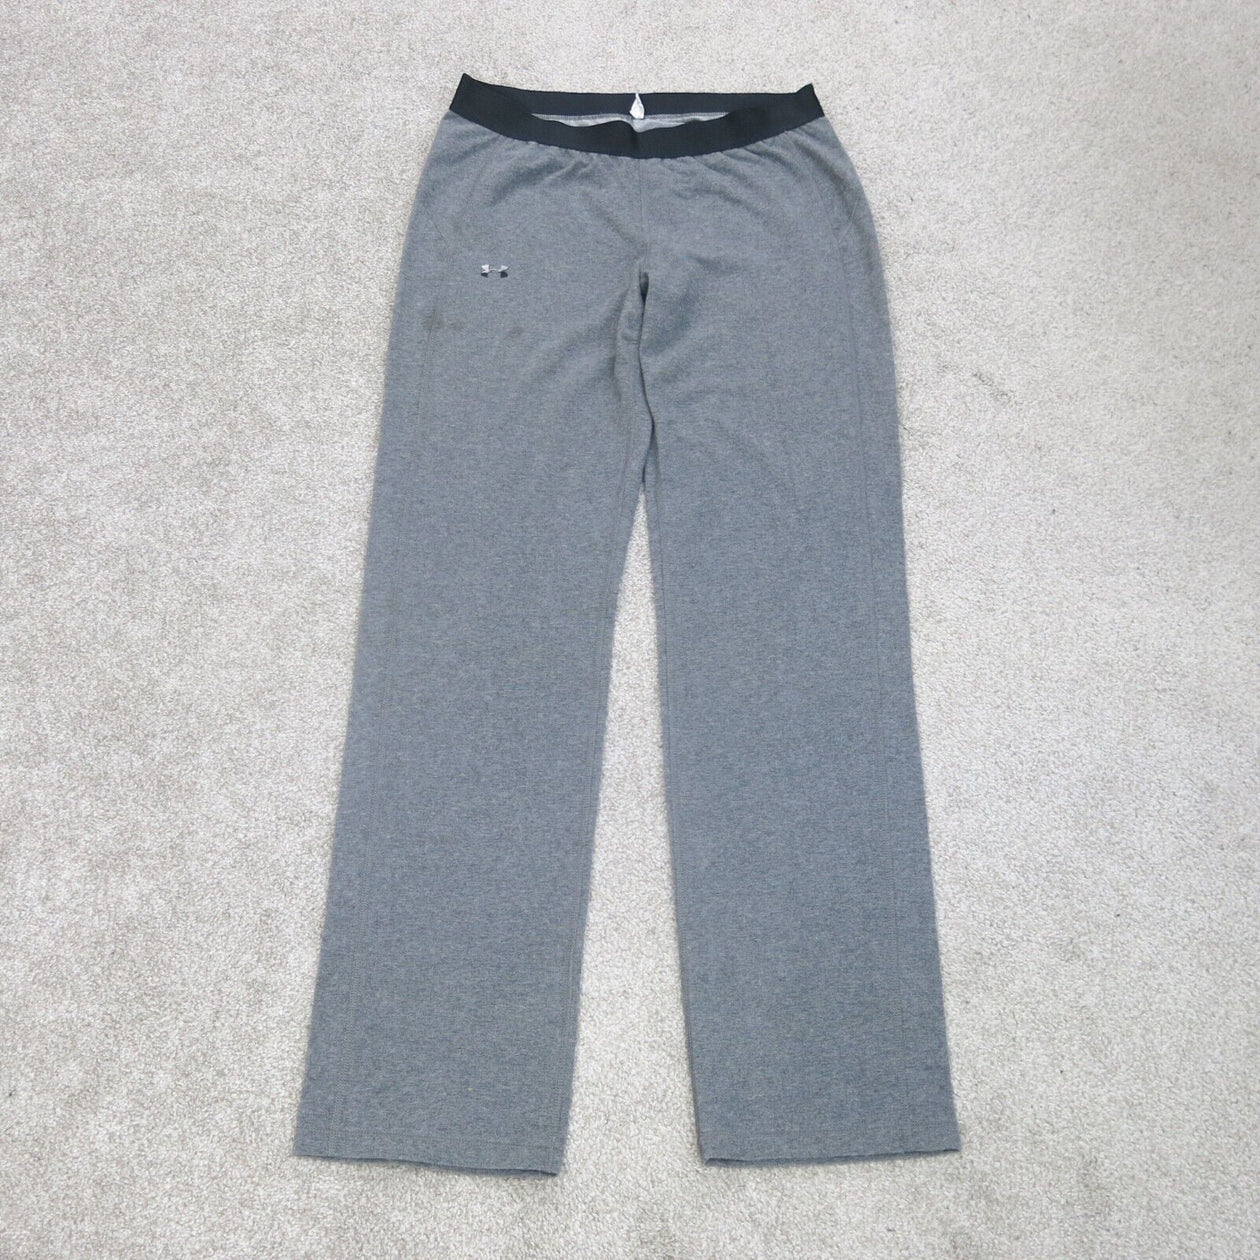 Under Armour Pants Womens Large Gray Activewear Straight Leg